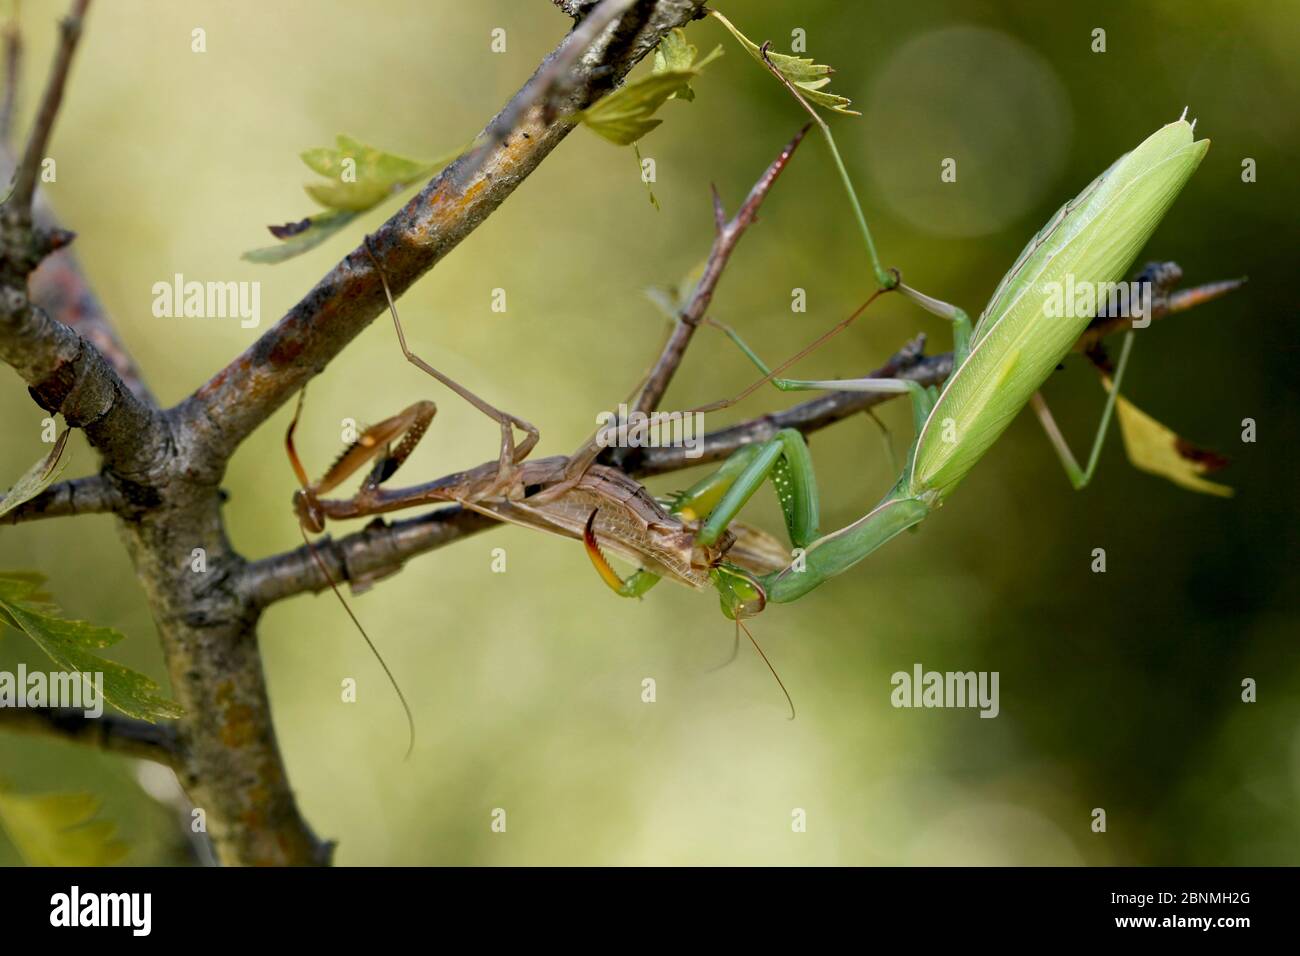 European praying mantis female (Mantis religiosa) eating a male after mating, Vaucluse, France, September. Stock Photo